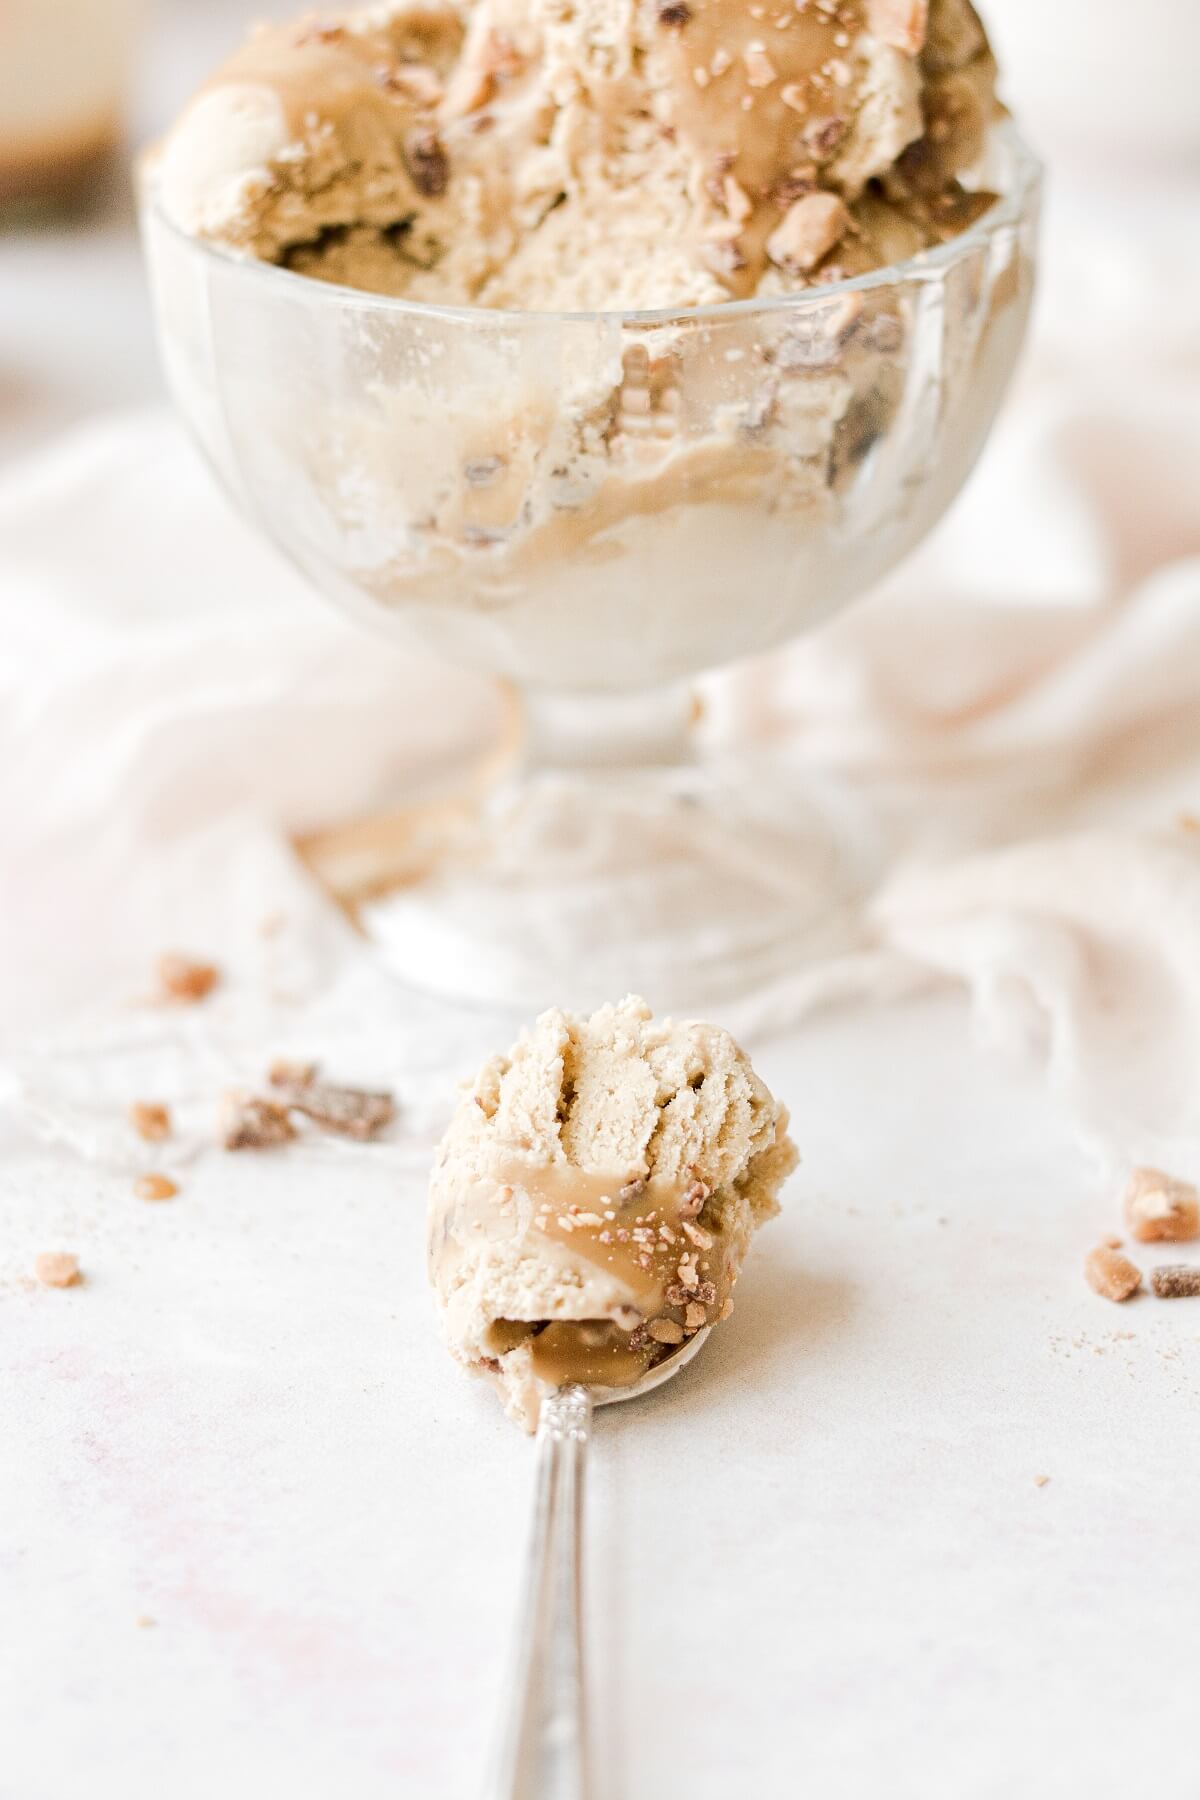 A spoonful of caramelized banana ice cream, next to a dish of ice cream.